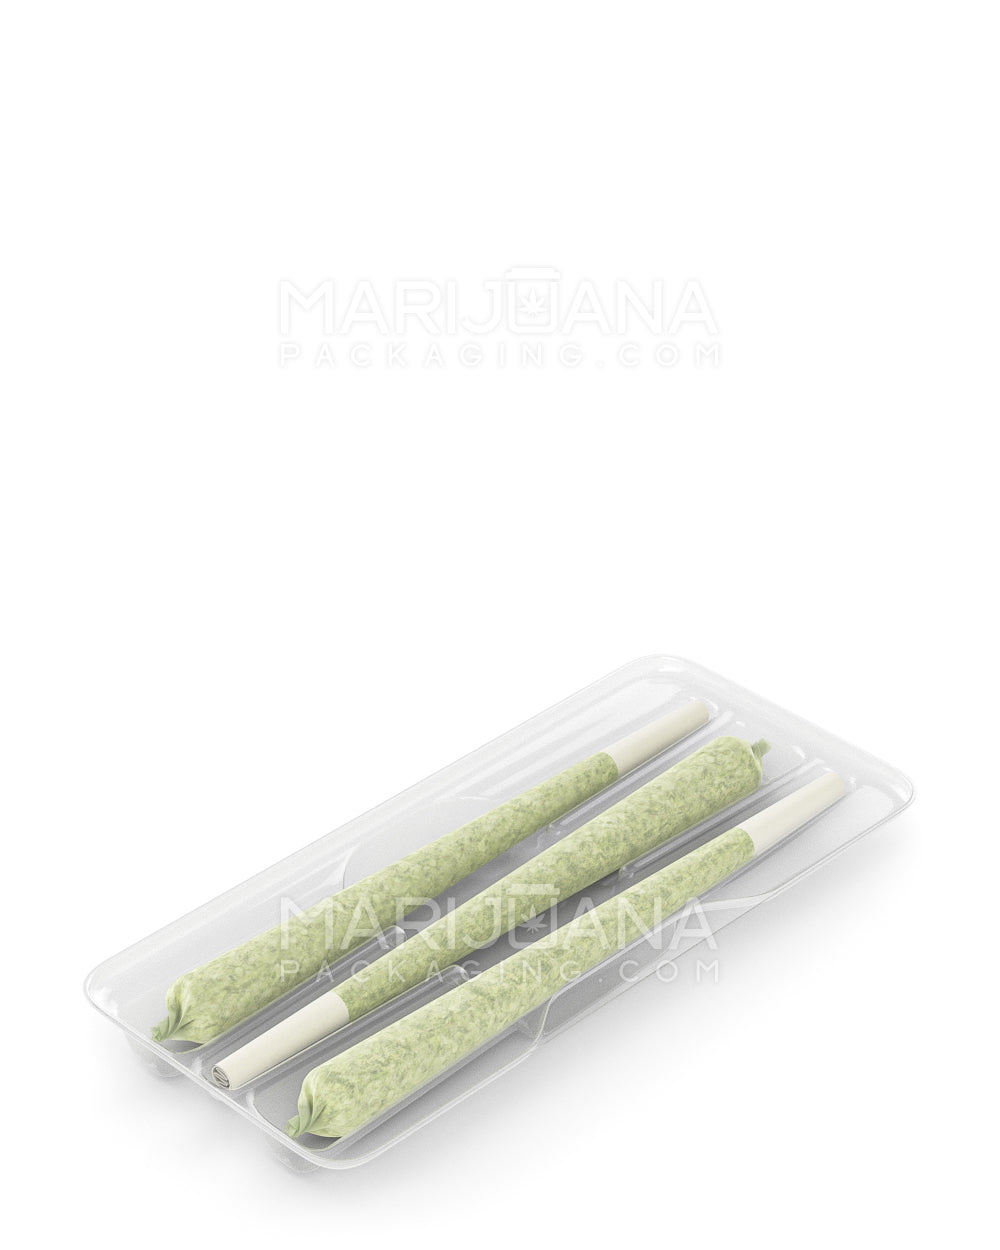 Edible & Joint Box Insert Tray for 3 King Size Pre Rolled Cones | 109mm - Clear Plastic - 100 Count - 2